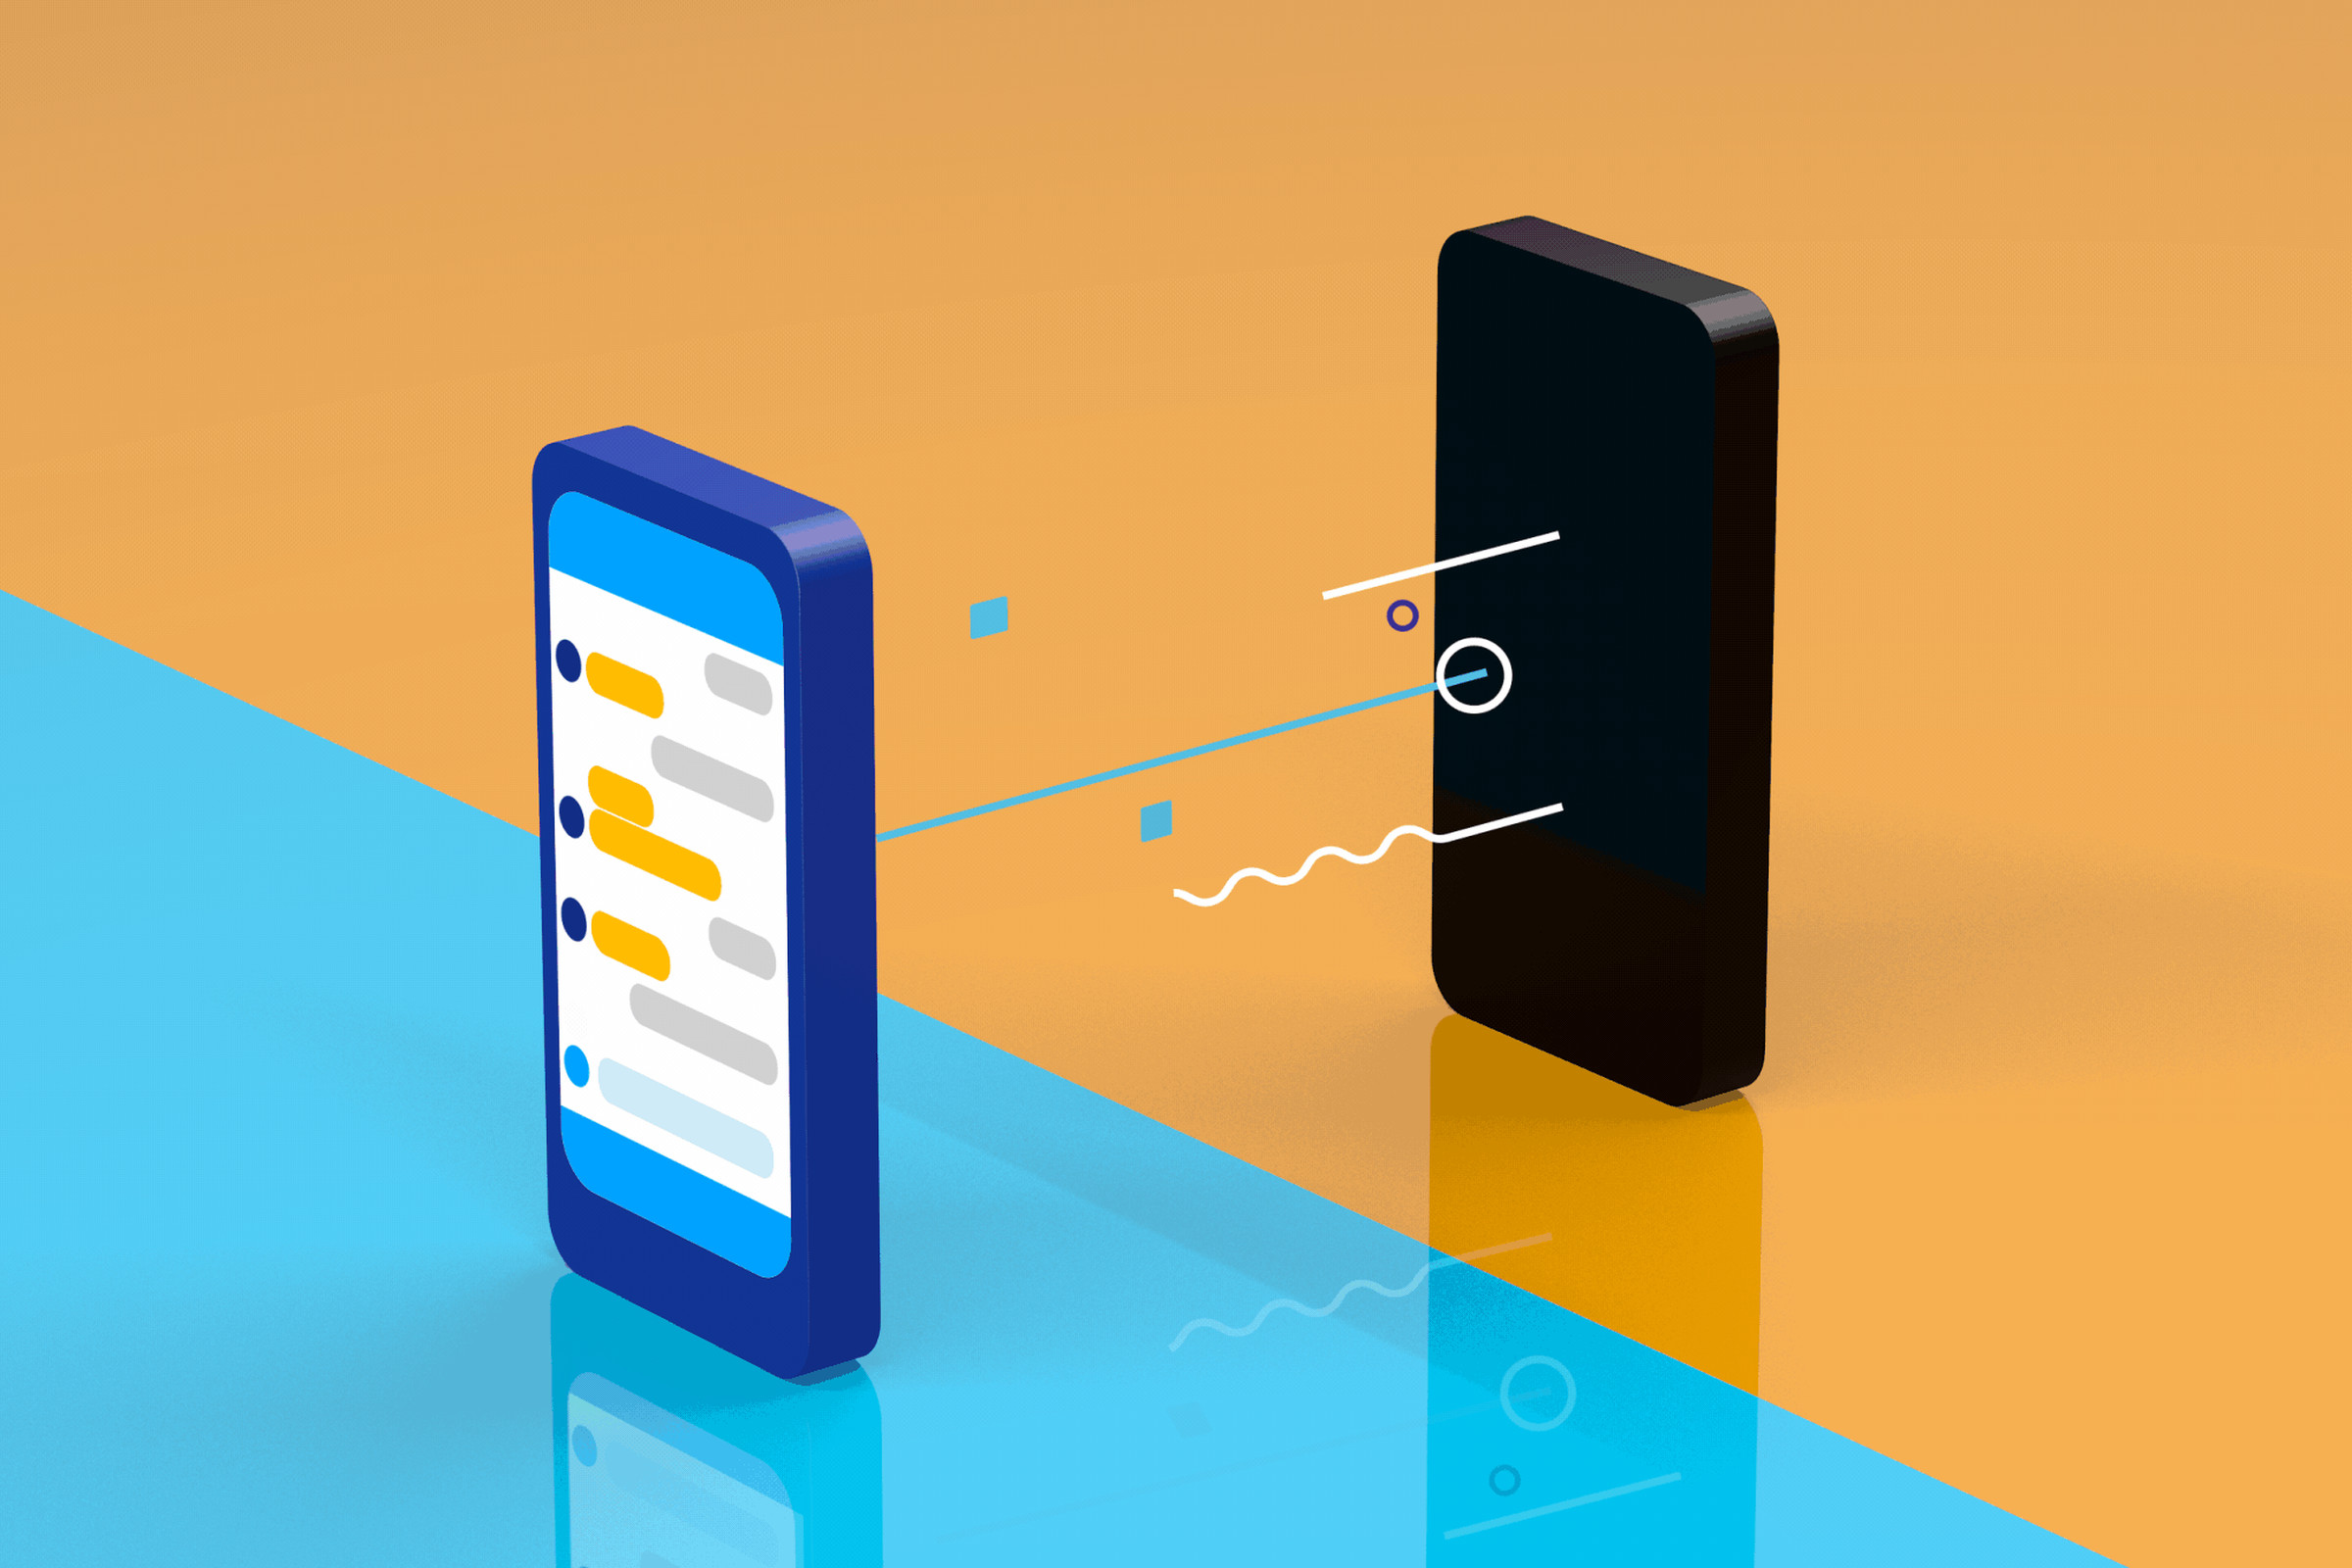 An illustration of two phones sharing data